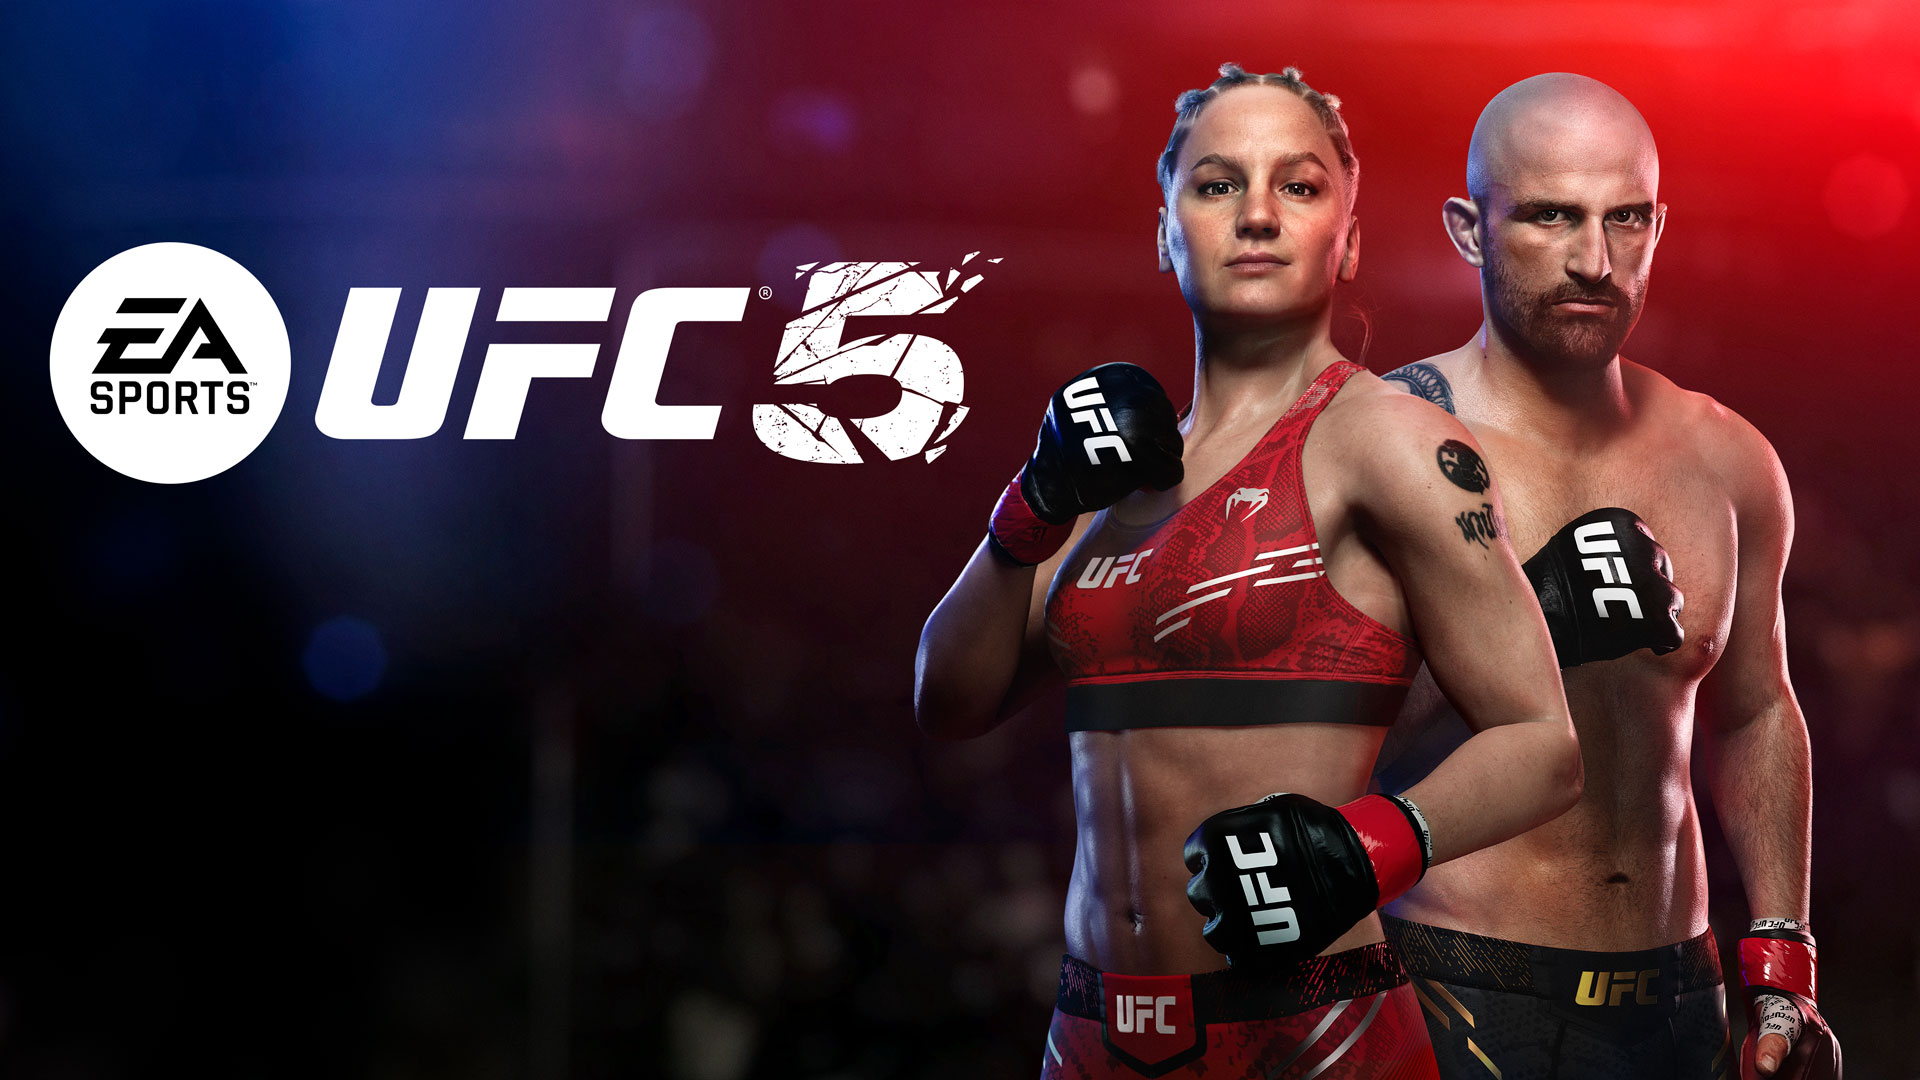 EA UFC 5 promises to be the most realistic game in the series